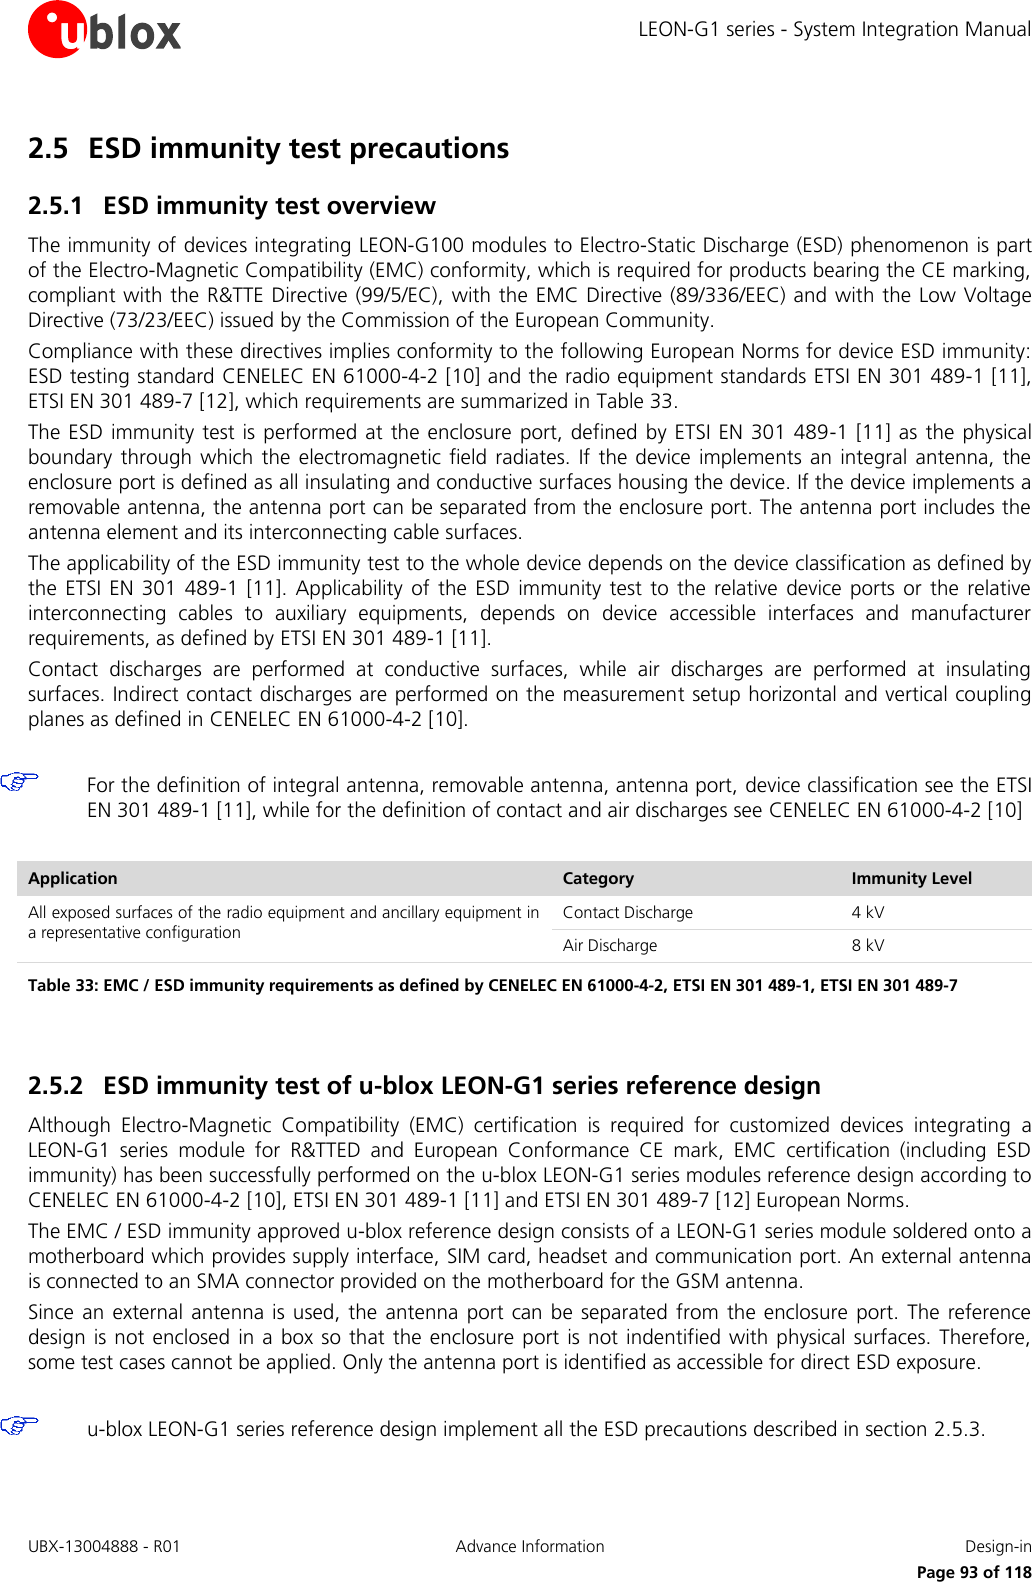 LEON-G1 series - System Integration Manual UBX-13004888 - R01  Advance Information  Design-in      Page 93 of 118 2.5 ESD immunity test precautions 2.5.1 ESD immunity test overview The immunity of devices integrating LEON-G100 modules to Electro-Static Discharge (ESD) phenomenon is part of the Electro-Magnetic Compatibility (EMC) conformity, which is required for products bearing the CE marking, compliant with the R&amp;TTE Directive (99/5/EC),  with the EMC Directive (89/336/EEC) and with the Low Voltage Directive (73/23/EEC) issued by the Commission of the European Community.  Compliance with these directives implies conformity to the following European Norms for device ESD immunity: ESD testing standard CENELEC EN 61000-4-2 [10] and the radio equipment standards ETSI EN 301 489-1 [11], ETSI EN 301 489-7 [12], which requirements are summarized in Table 33.  The ESD immunity test is performed at the enclosure port, defined by ETSI EN 301 489-1 [11]  as the physical boundary  through which  the electromagnetic field radiates. If  the device implements an  integral antenna, the enclosure port is defined as all insulating and conductive surfaces housing the device. If the device implements a removable antenna, the antenna port can be separated from the enclosure port. The antenna port includes the antenna element and its interconnecting cable surfaces.  The applicability of the ESD immunity test to the whole device depends on the device classification as defined by the  ETSI  EN  301  489-1  [11].  Applicability of the ESD immunity test to  the  relative device ports or the relative interconnecting  cables  to  auxiliary  equipments,  depends  on  device  accessible  interfaces  and  manufacturer requirements, as defined by ETSI EN 301 489-1 [11].  Contact  discharges  are  performed  at  conductive  surfaces,  while  air  discharges  are  performed  at  insulating surfaces. Indirect contact discharges are performed on the measurement setup horizontal and vertical coupling planes as defined in CENELEC EN 61000-4-2 [10].   For the definition of integral antenna, removable antenna, antenna port, device classification see the ETSI EN 301 489-1 [11], while for the definition of contact and air discharges see CENELEC EN 61000-4-2 [10]  Application Category Immunity Level All exposed surfaces of the radio equipment and ancillary equipment in a representative configuration Contact Discharge 4 kV Air Discharge 8 kV Table 33: EMC / ESD immunity requirements as defined by CENELEC EN 61000-4-2, ETSI EN 301 489-1, ETSI EN 301 489-7   2.5.2 ESD immunity test of u-blox LEON-G1 series reference design Although  Electro-Magnetic  Compatibility  (EMC)  certification  is  required  for  customized  devices  integrating  a LEON-G1  series  module  for  R&amp;TTED  and  European  Conformance  CE  mark,  EMC  certification  (including  ESD immunity) has been successfully performed on the u-blox LEON-G1 series modules reference design according to CENELEC EN 61000-4-2 [10], ETSI EN 301 489-1 [11] and ETSI EN 301 489-7 [12] European Norms. The EMC / ESD immunity approved u-blox reference design consists of a LEON-G1 series module soldered onto a motherboard which provides supply interface, SIM card, headset and communication port. An external antenna is connected to an SMA connector provided on the motherboard for the GSM antenna. Since an external antenna is used, the  antenna port  can be  separated  from  the enclosure port.  The reference design is not enclosed in a box so that the enclosure port  is not indentified with physical surfaces. Therefore, some test cases cannot be applied. Only the antenna port is identified as accessible for direct ESD exposure.   u-blox LEON-G1 series reference design implement all the ESD precautions described in section 2.5.3.  